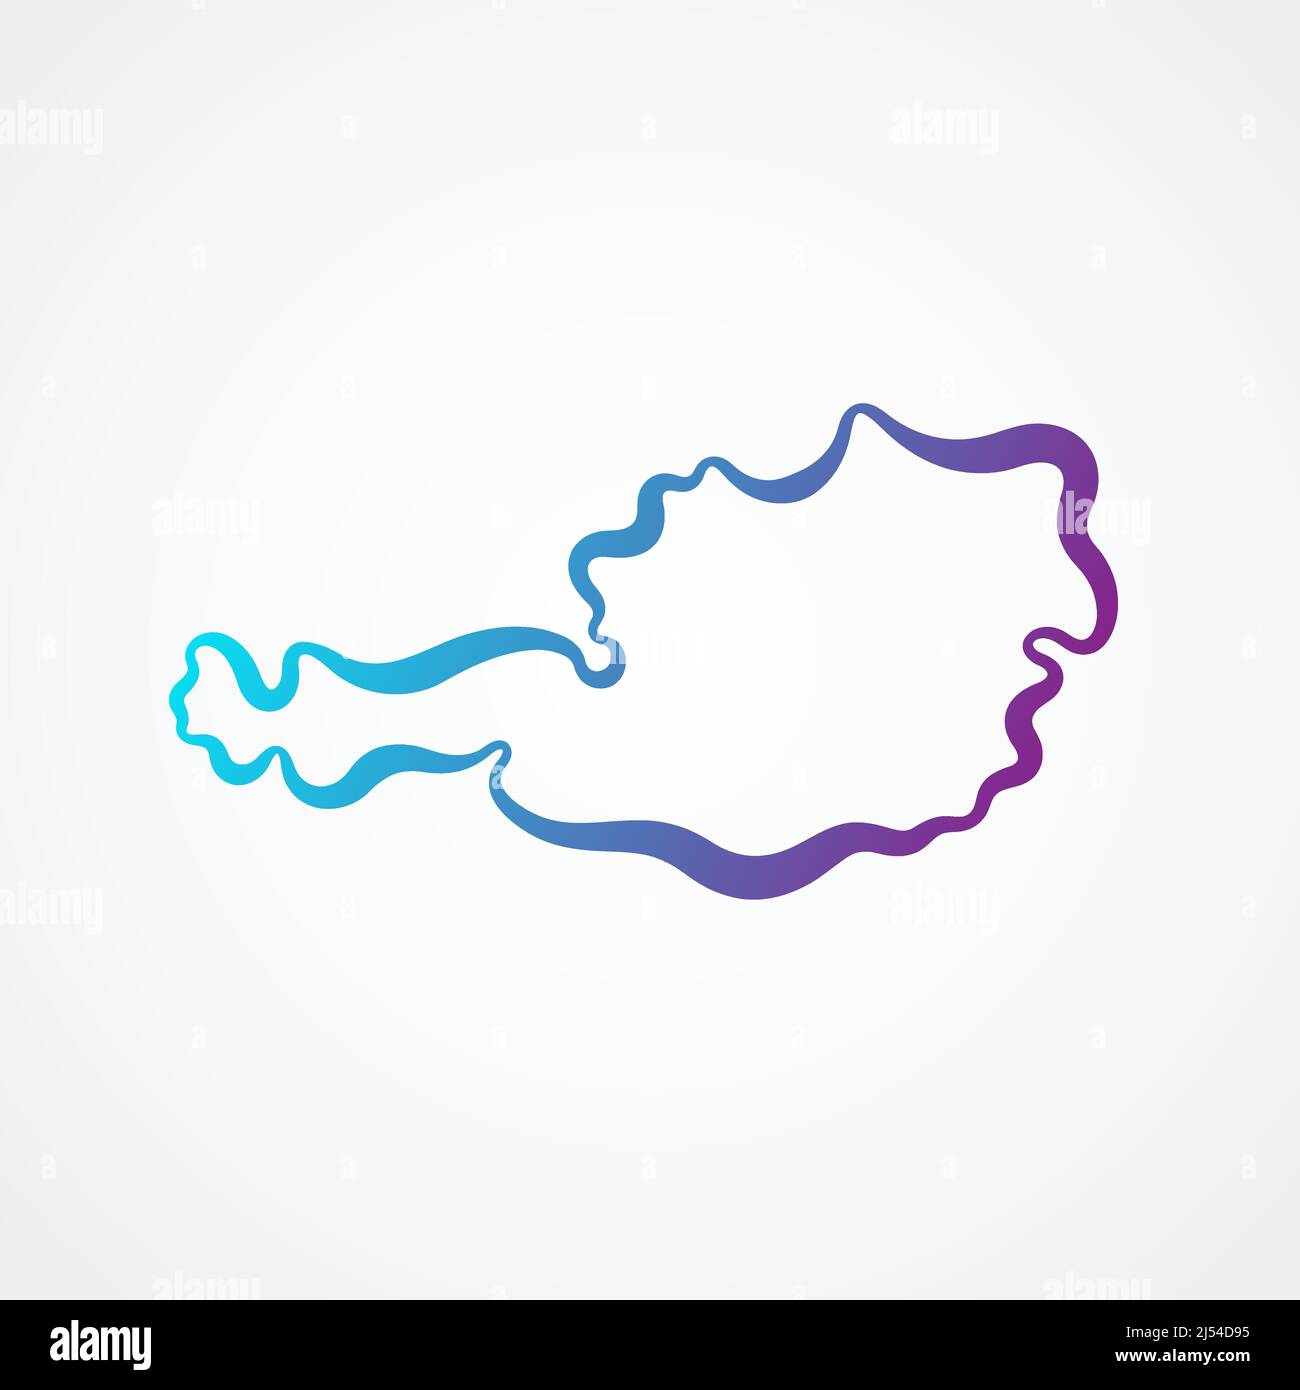 Outline map of Austria with blue-purple gradient. Stock Vector